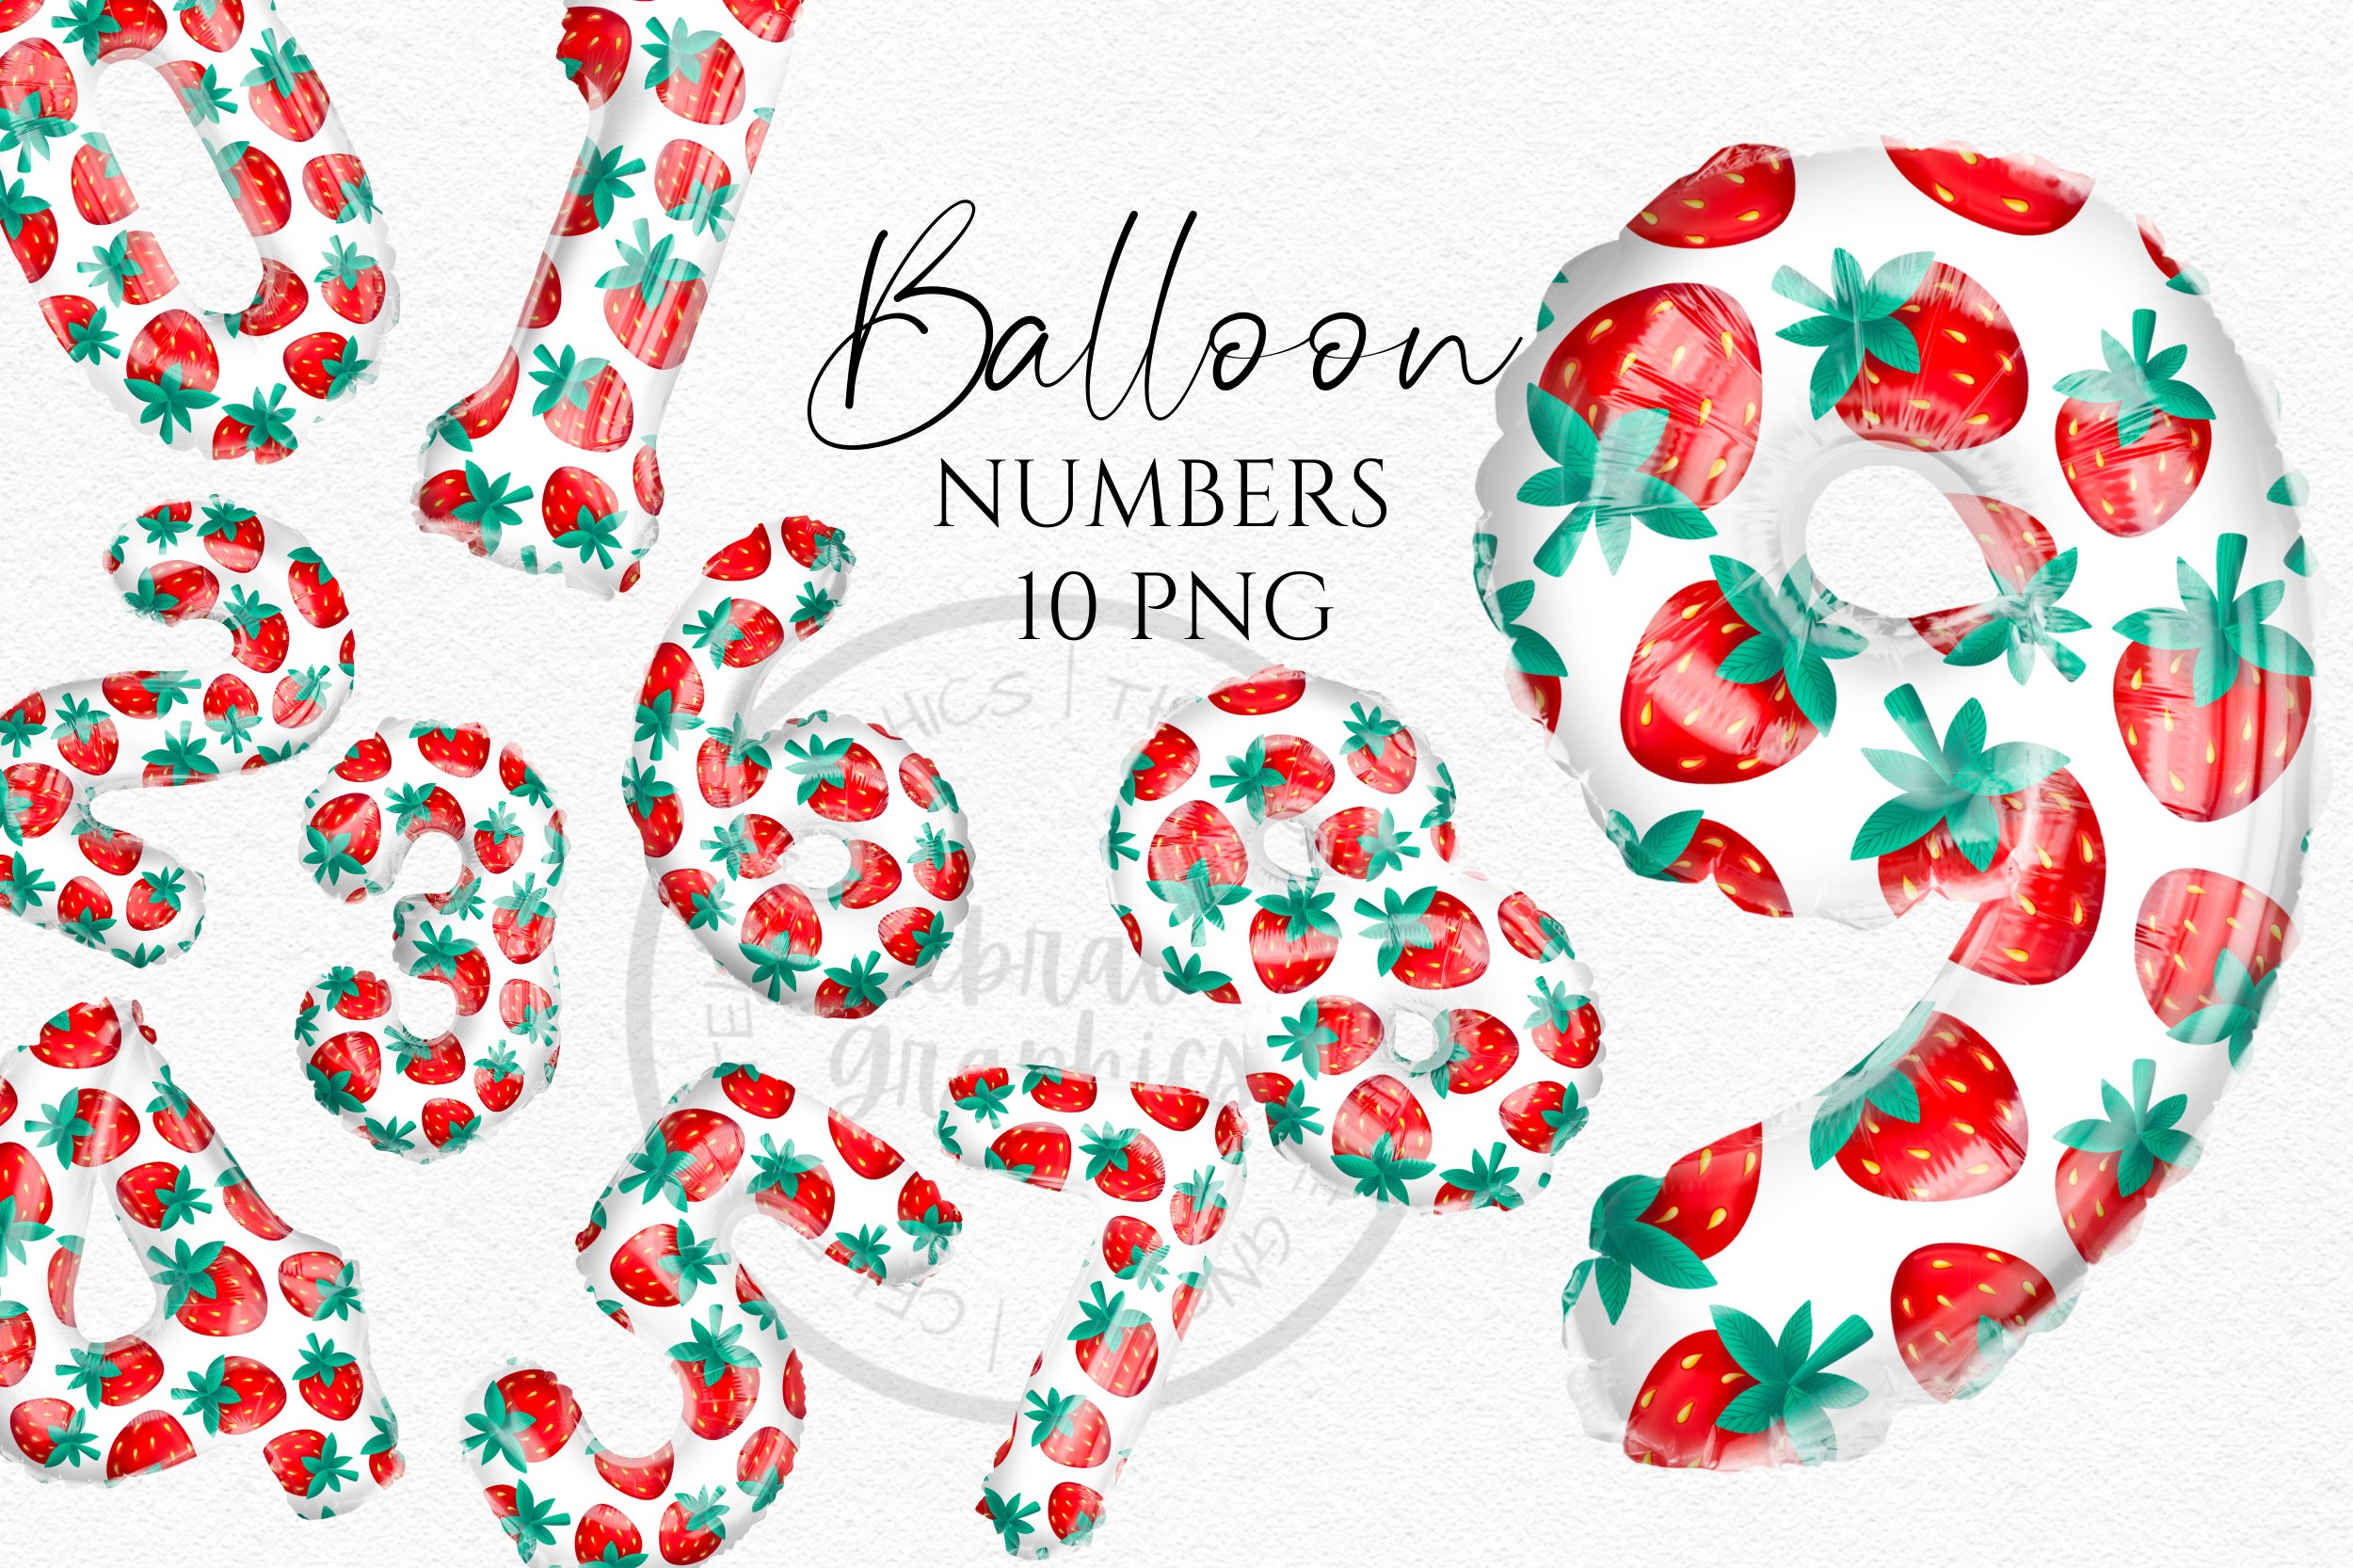 Black letetring "Balloon Numbers 10 PNG" and 10 numbers balloons with strawberry.